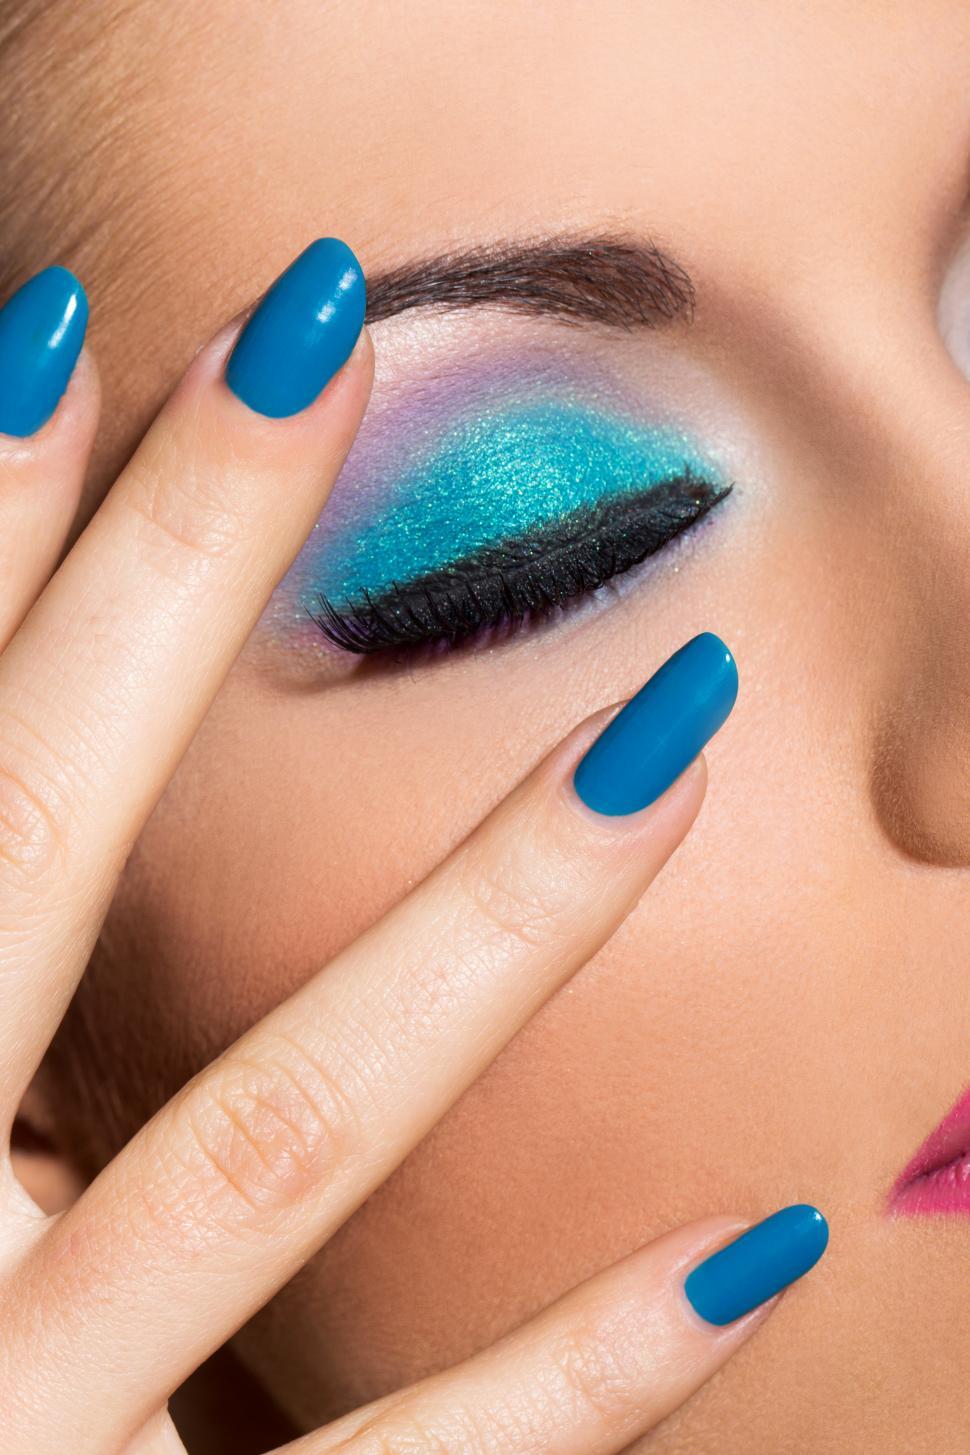 Free Image of Woman with colorful makeup and polished nails, eyes closed 